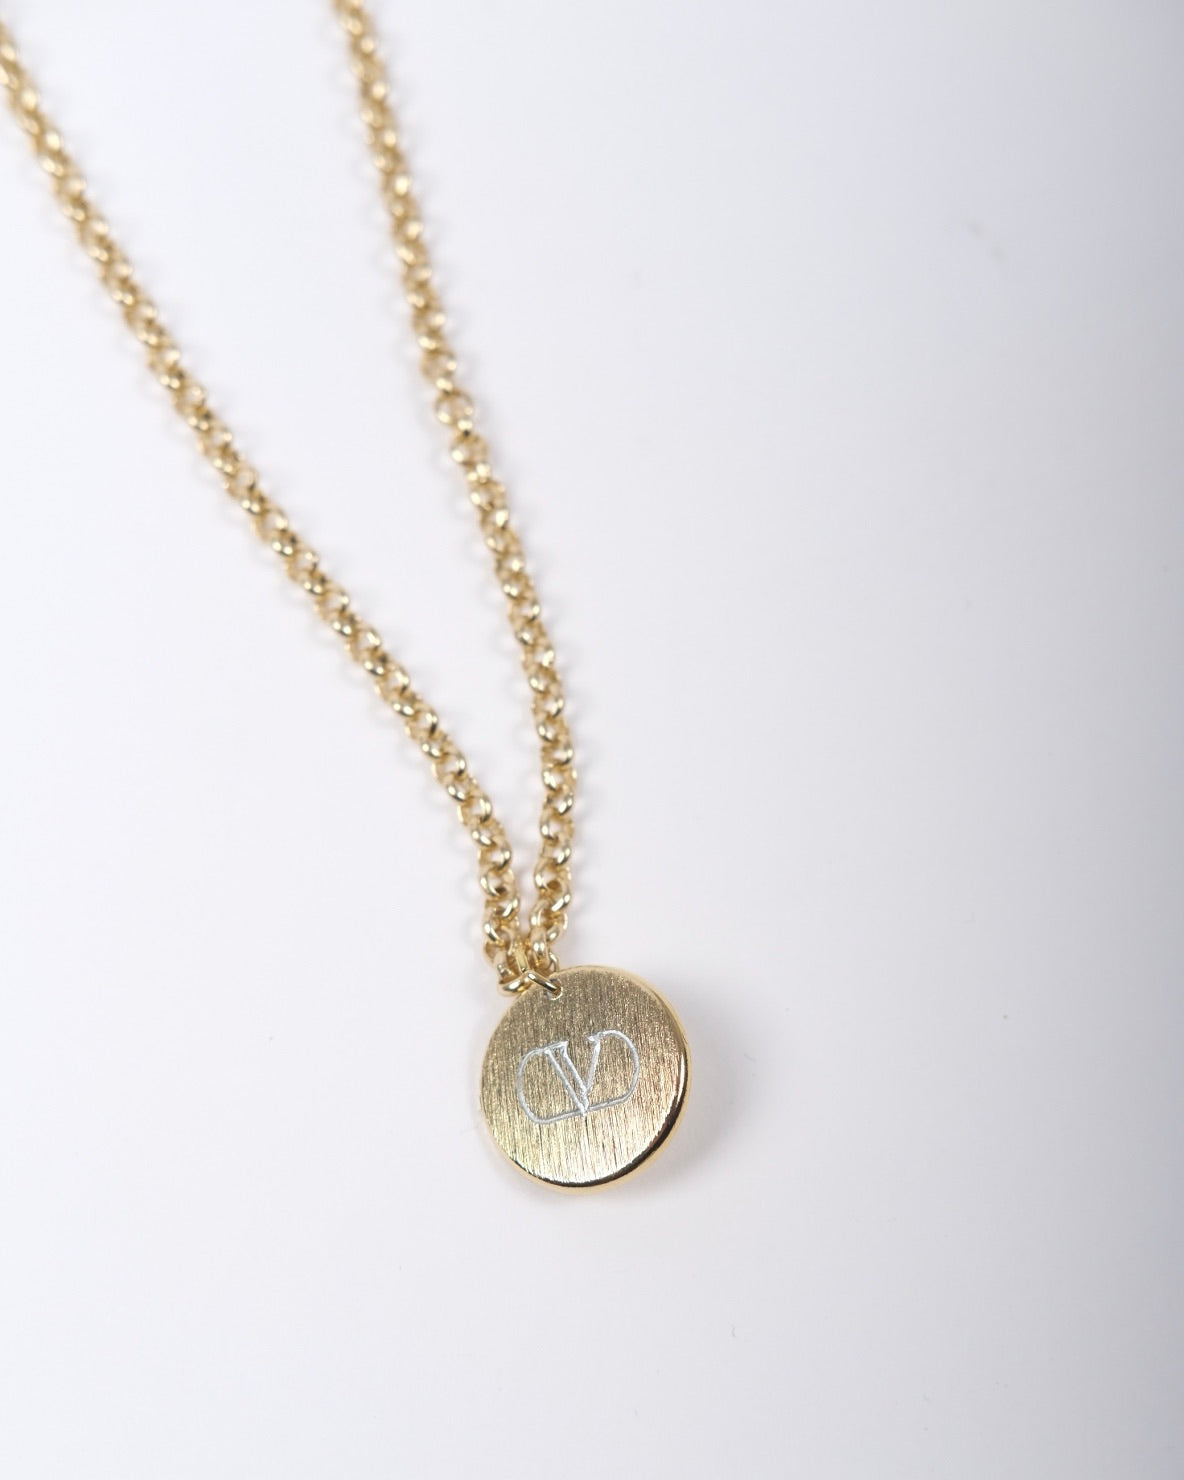 B3UPCYCLE: VALENTINO UPCYCLE NECKLACE GOLD BUTTON